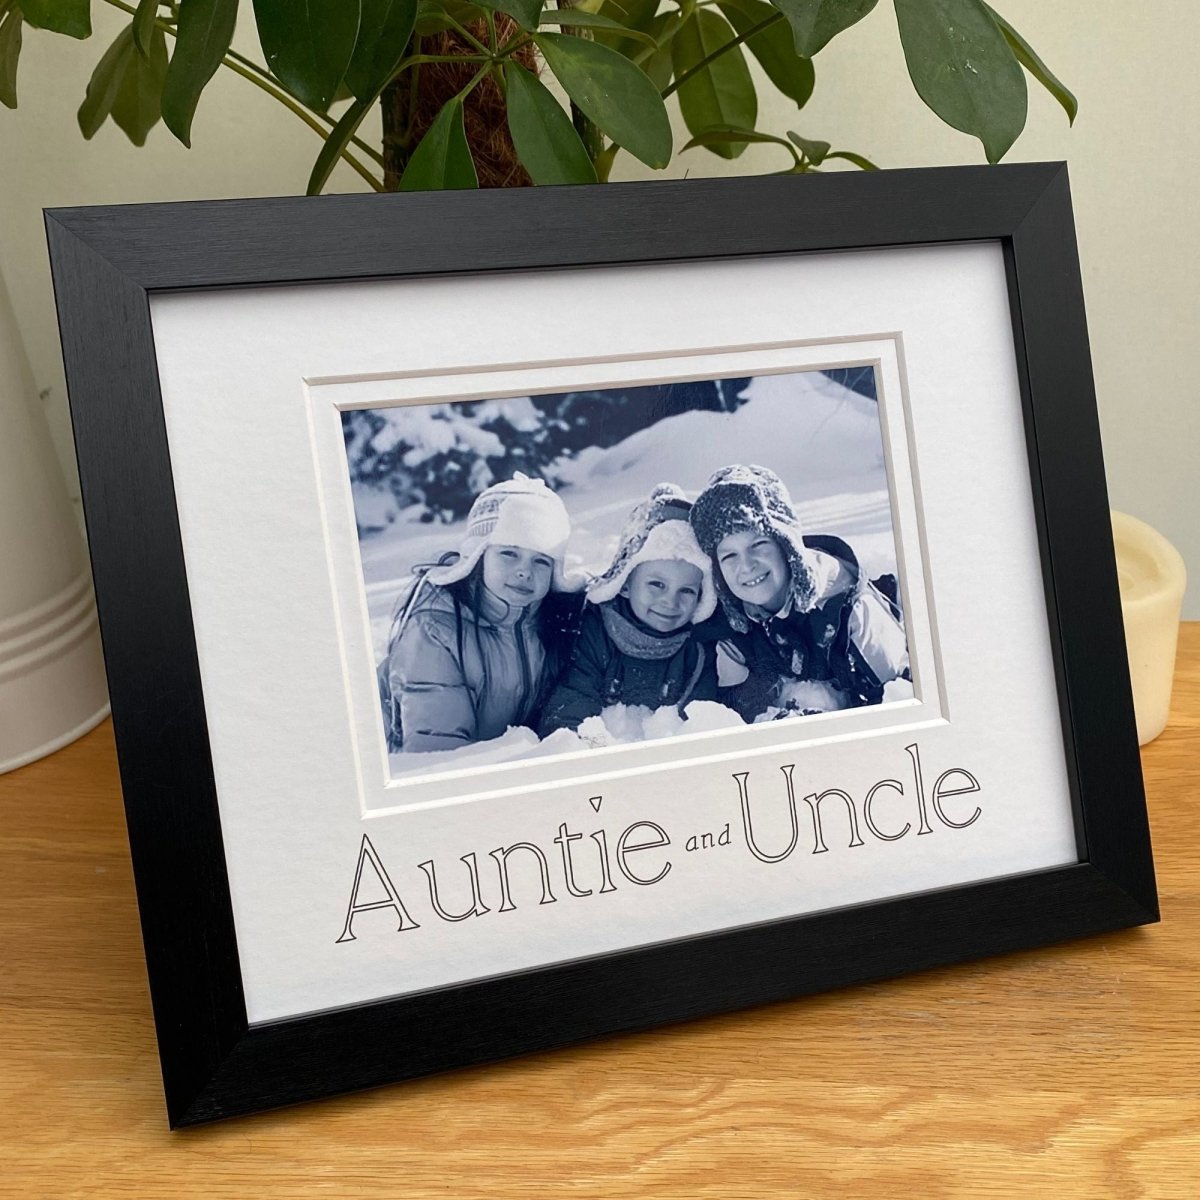 Auntie and Uncle Photo Frames